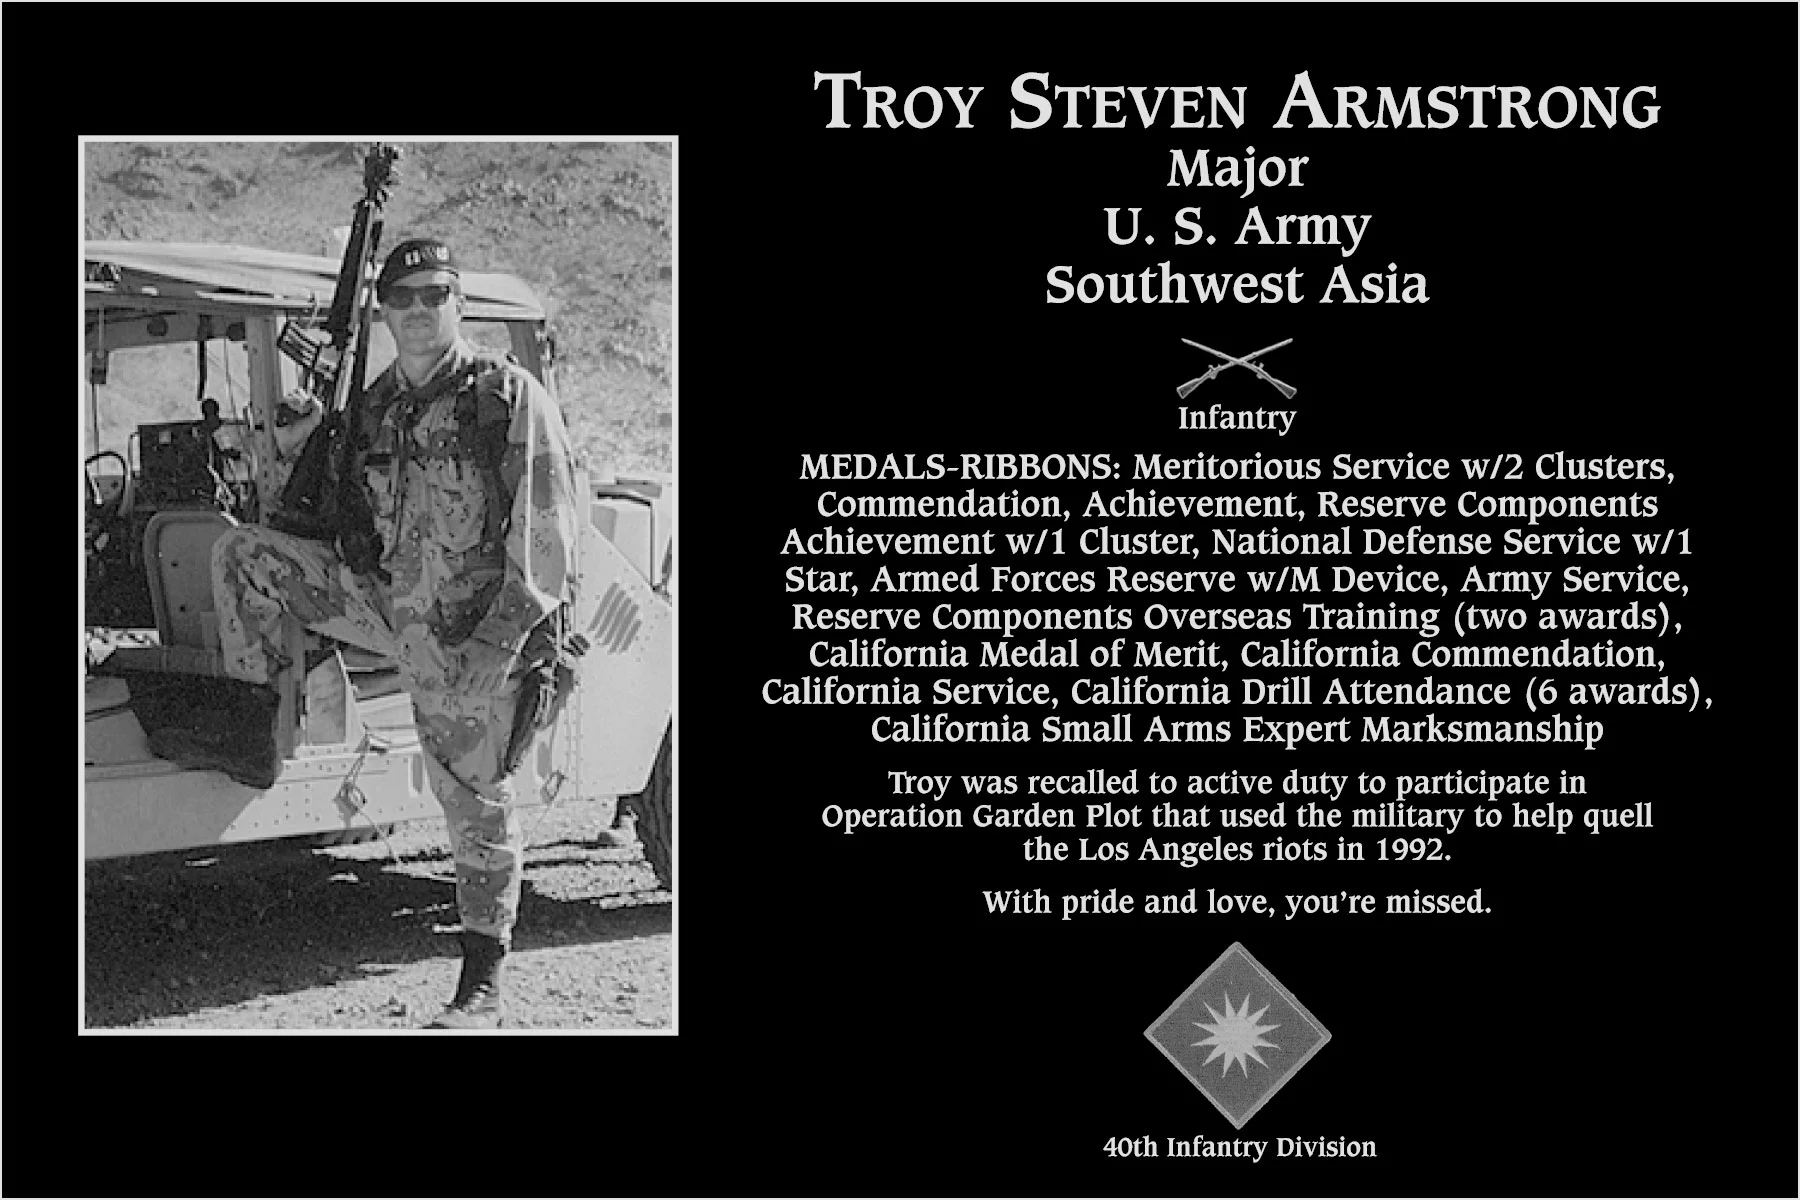 Troy Steven Armstrong